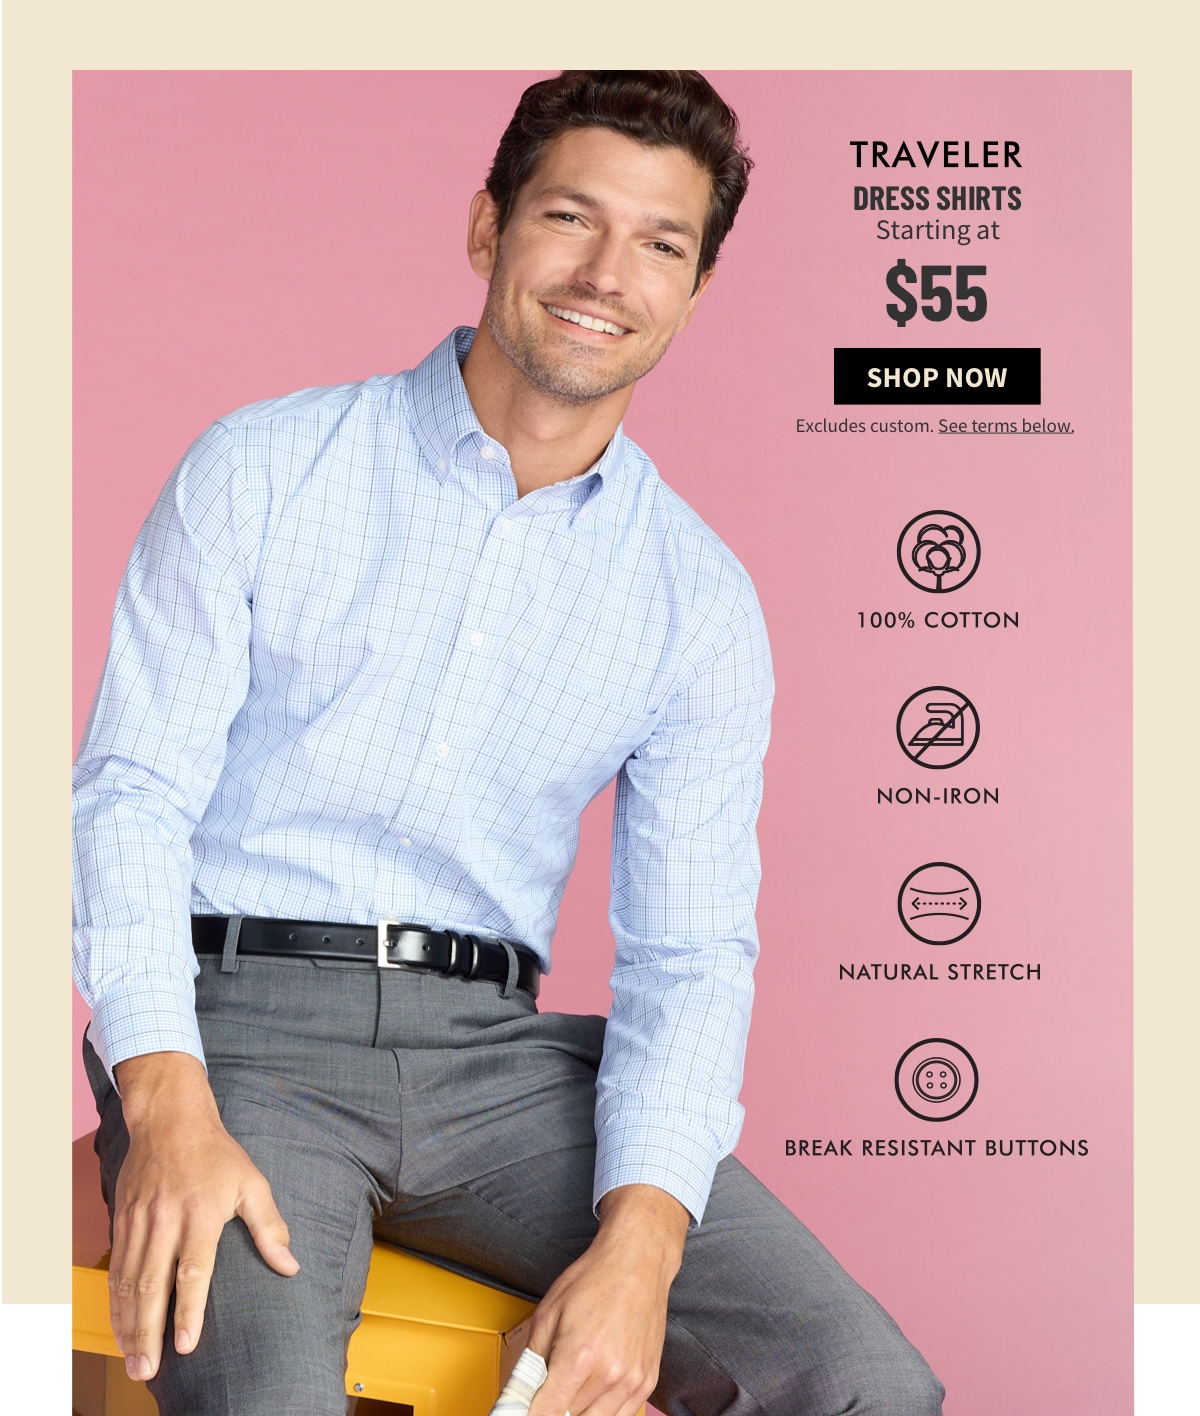 Traveler Dress Shirts Starting at $55 Shop Now Excludes custom. See terms below. 100% Cotton Non Iron Natural Stretch Break-Resistant Buttons